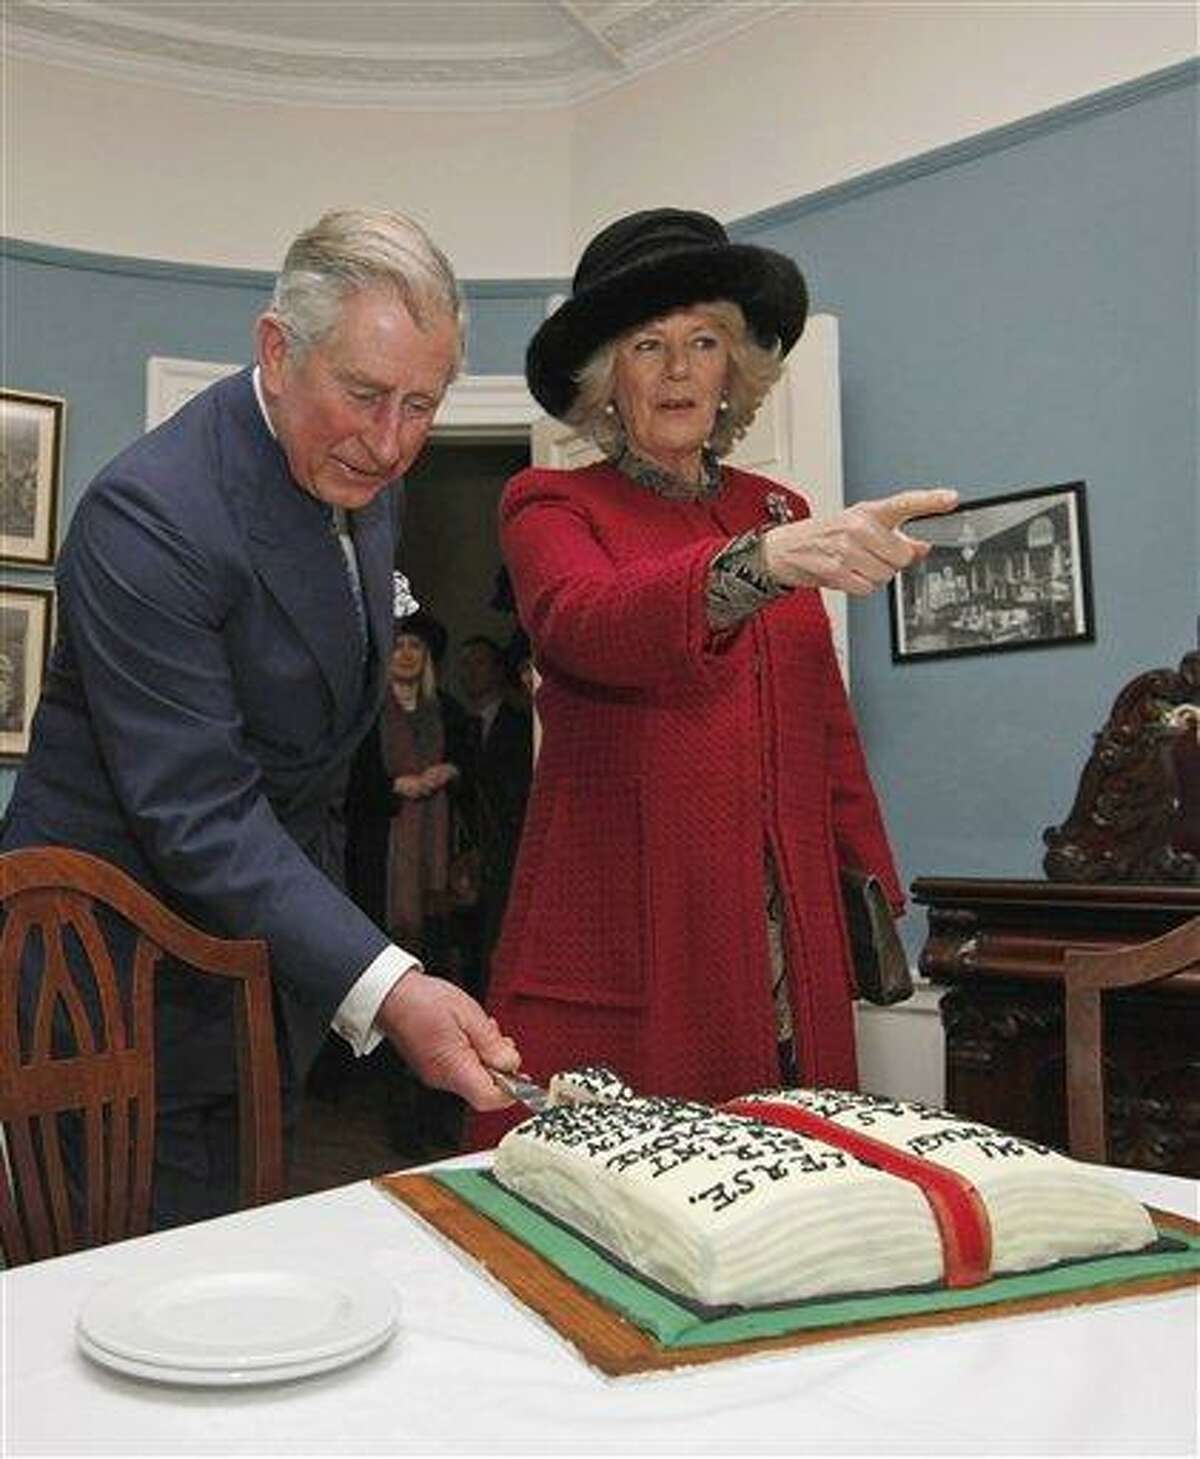 Britain's Prince Charles cuts a birthday cake in honor of Charles Dickens as he stands with his wife Camilla, Duchess of Cornwall, right, at the Dickens Museum in London Tuesday. Associated Press